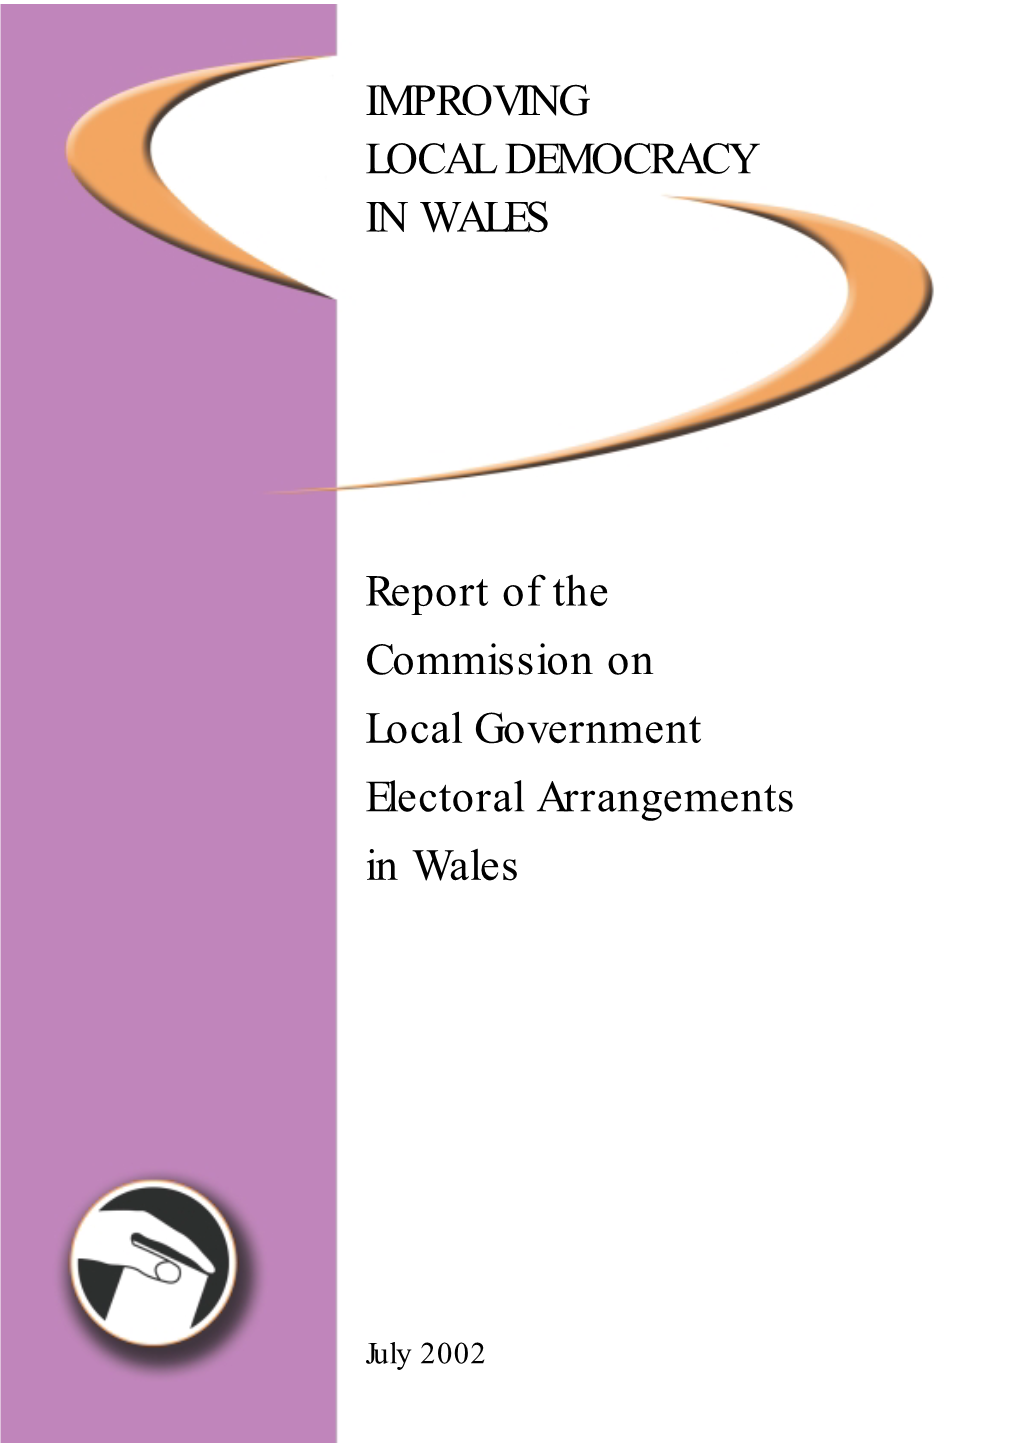 Report of the Commission on Local Government Electoral Arrangements in Wales